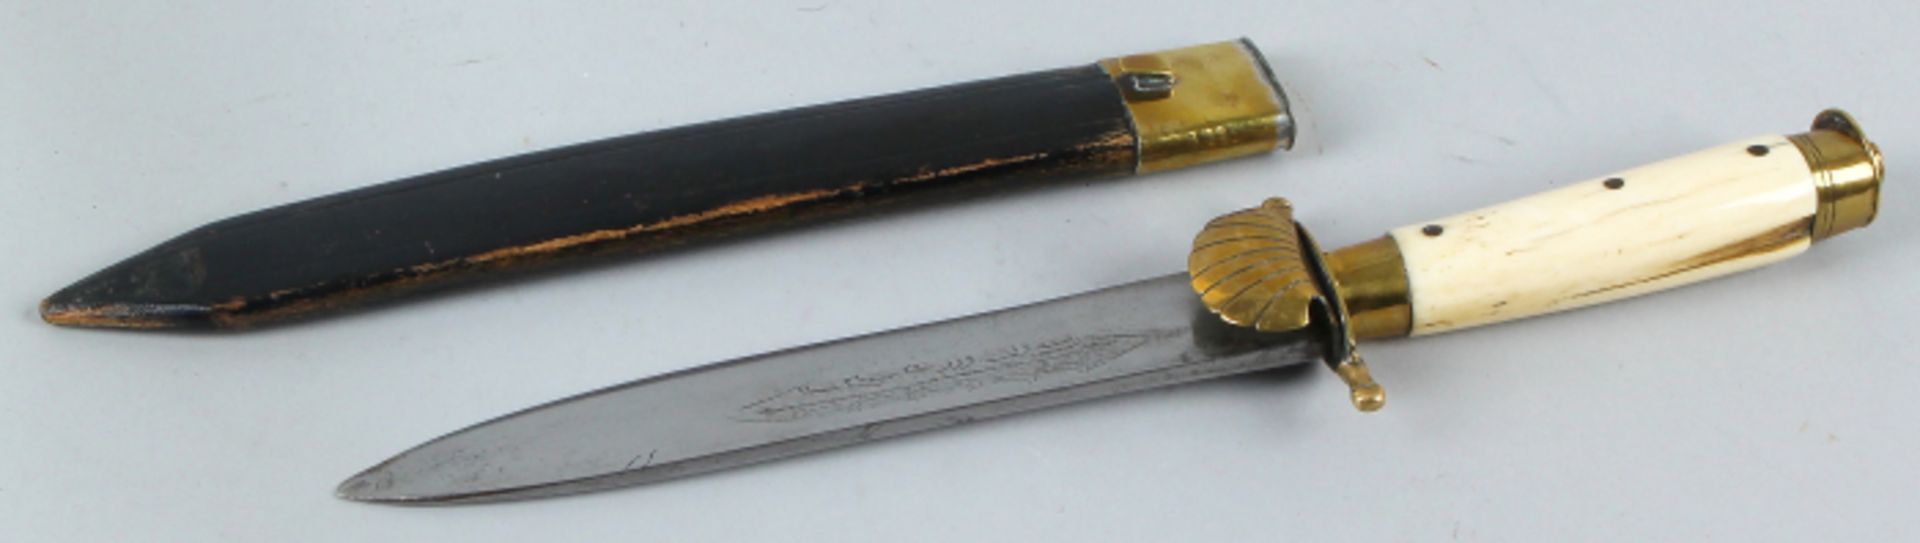 Dagger with brass and bone handle 1900 in good condition 31cm.     Dolch mit Messing und